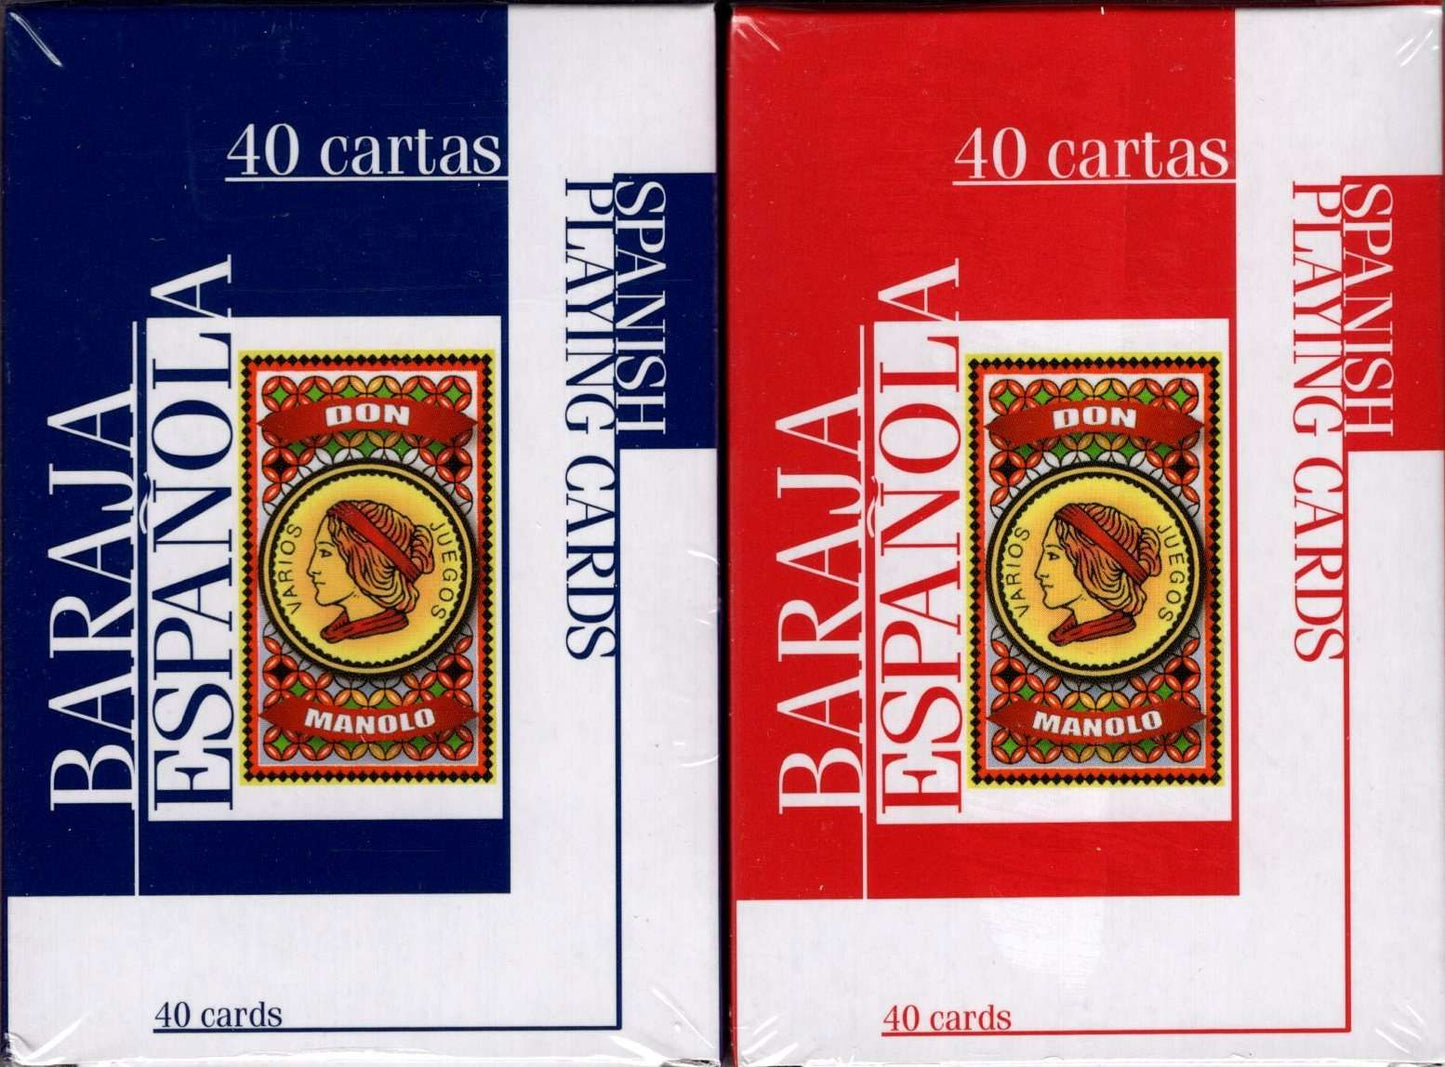 PlayingCardDecks.com-Don Manolo Spanish Suite Playing Cards USPCC - 2 Deck Set